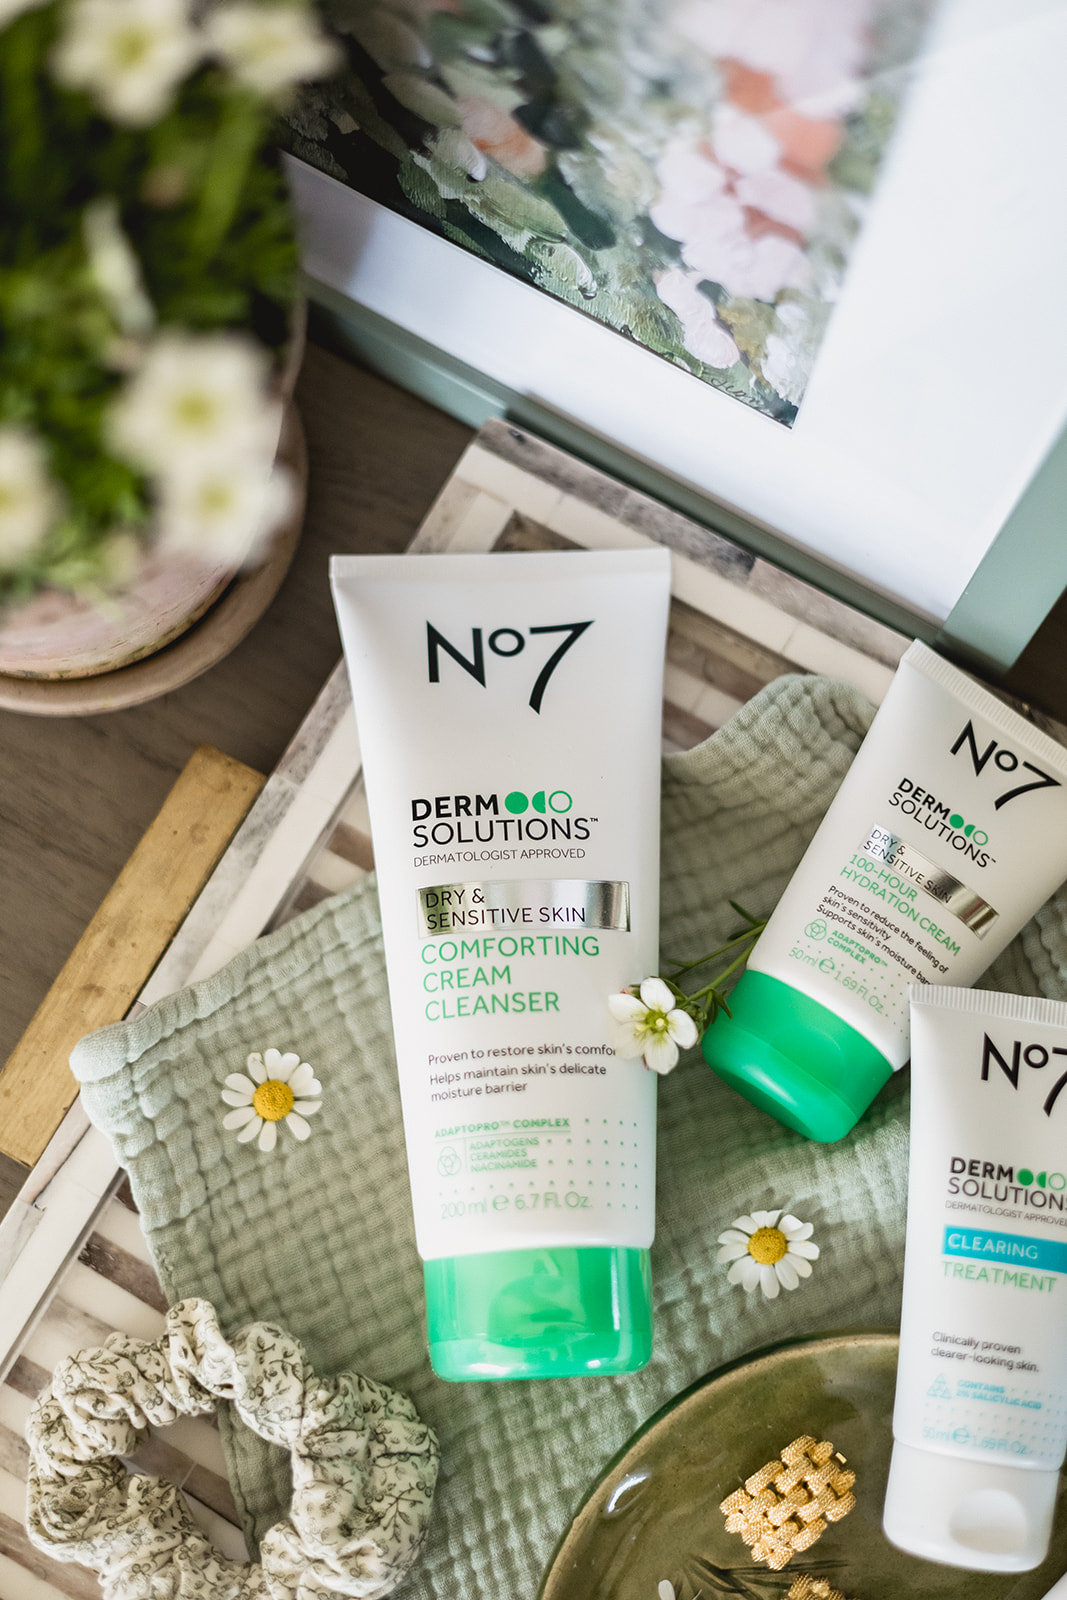 Mastering my Skincare Routine via Skin Type with No7 Derm Solutions